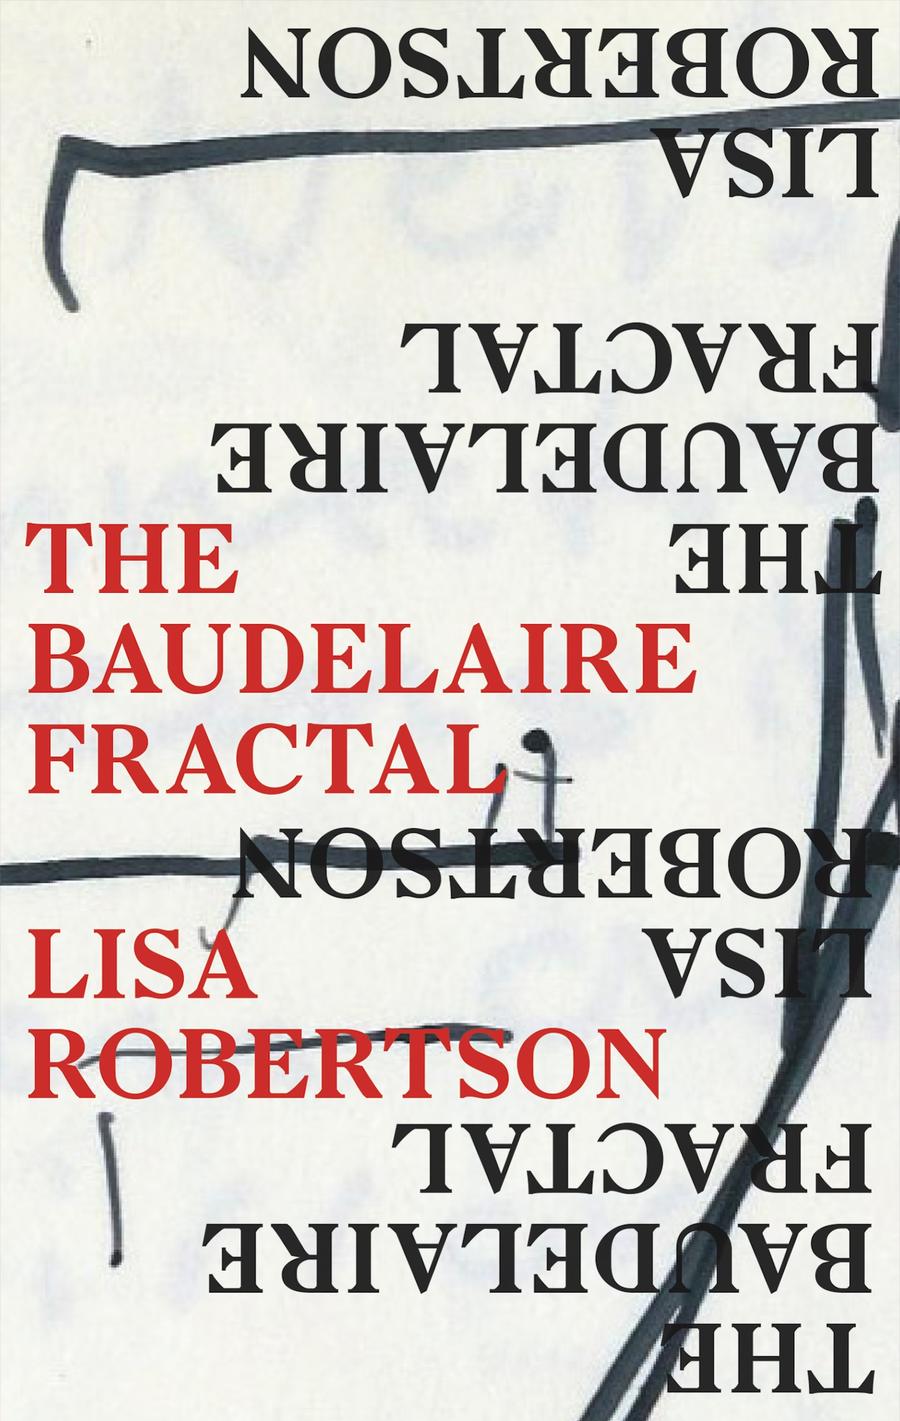 Book Launch: The Baudelaire Fractal by Lisa Robertson in conversation with Hildebrand Pam Dick